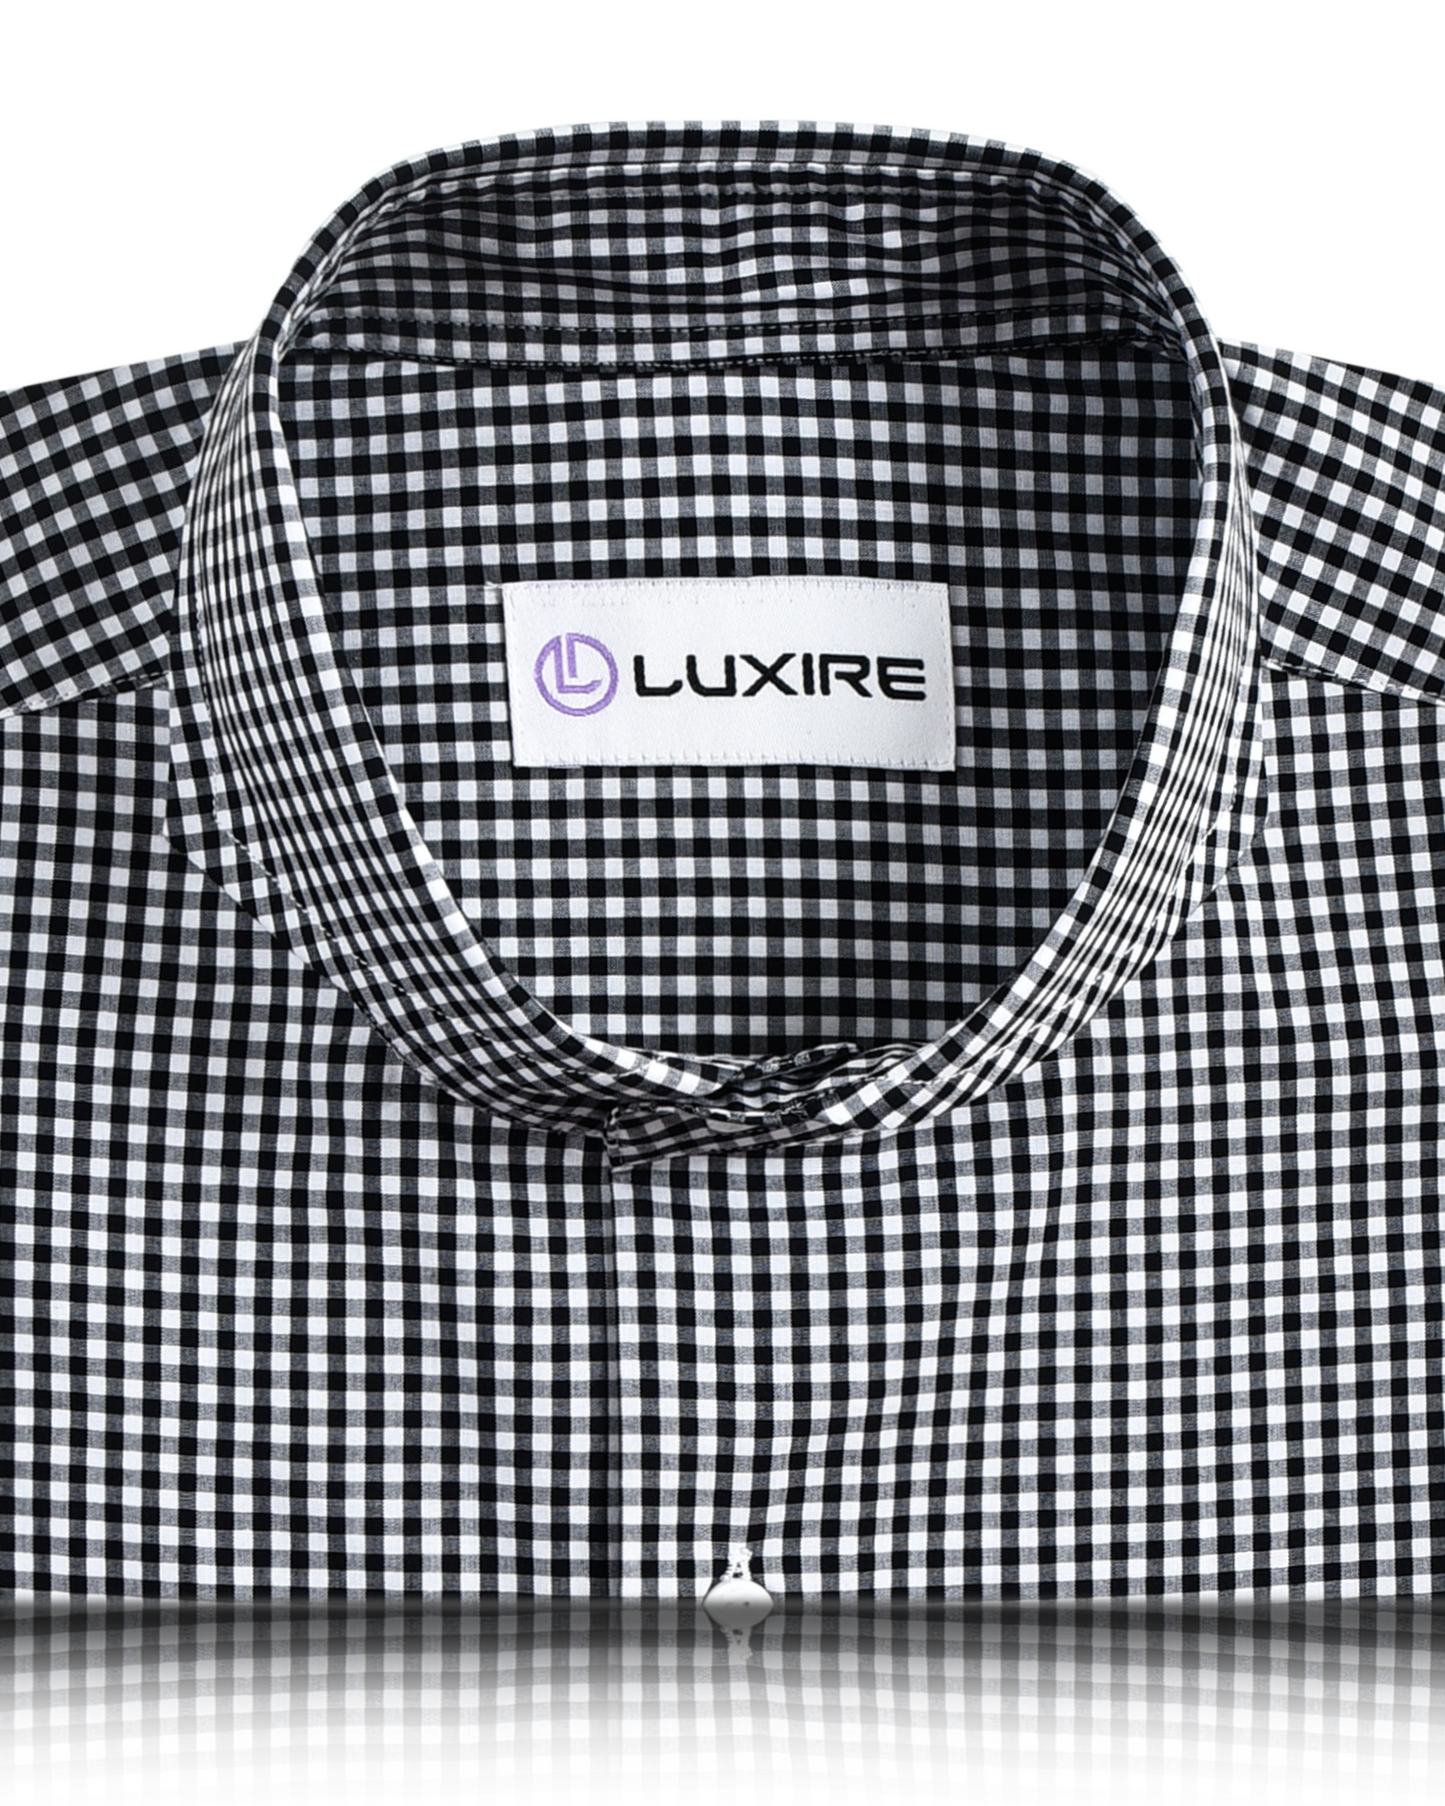 Front close view of custom check shirts for men by Luxire black and white gingham